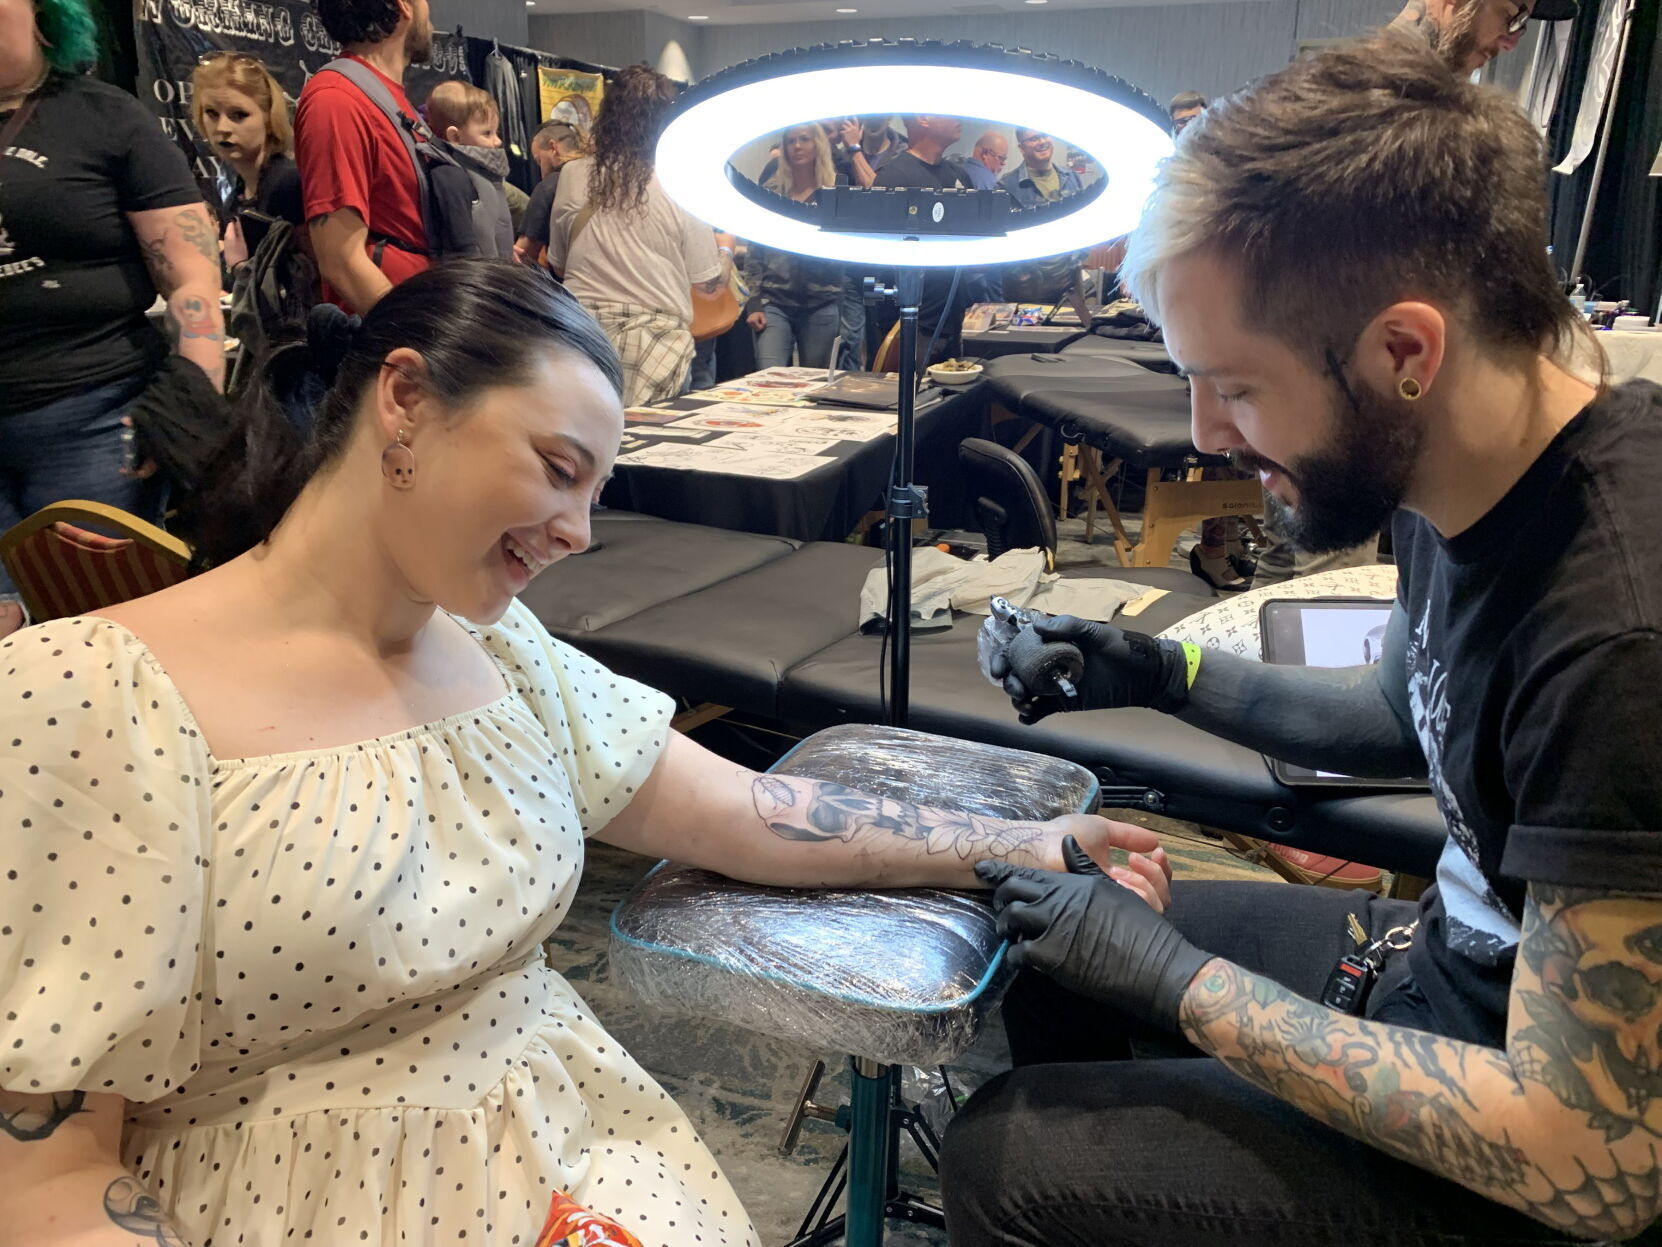 A Big Tattoo Convention Will Return to Iowa This Spring